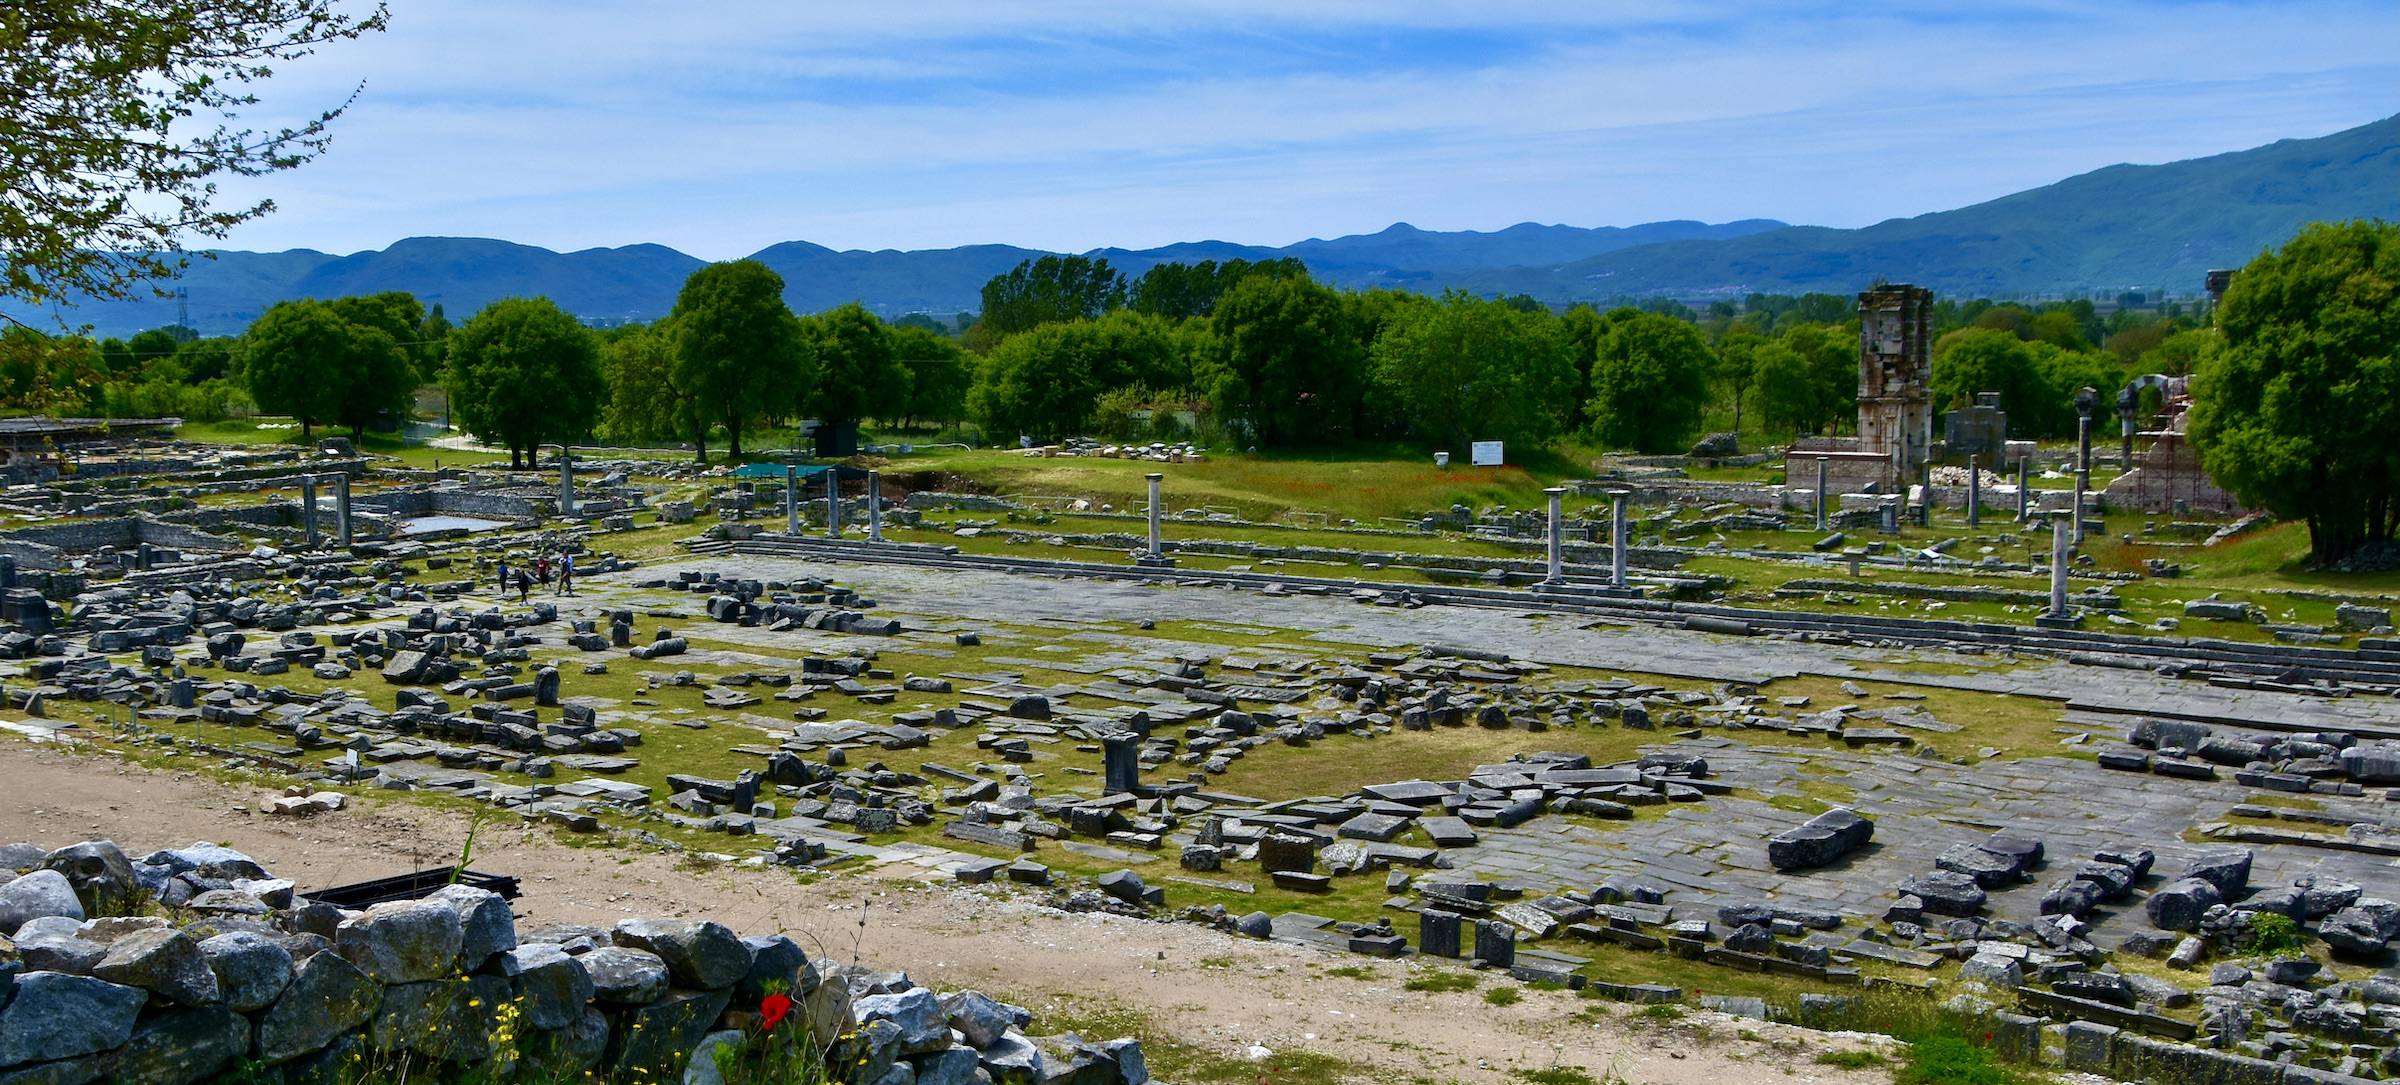 Overview of Philippi